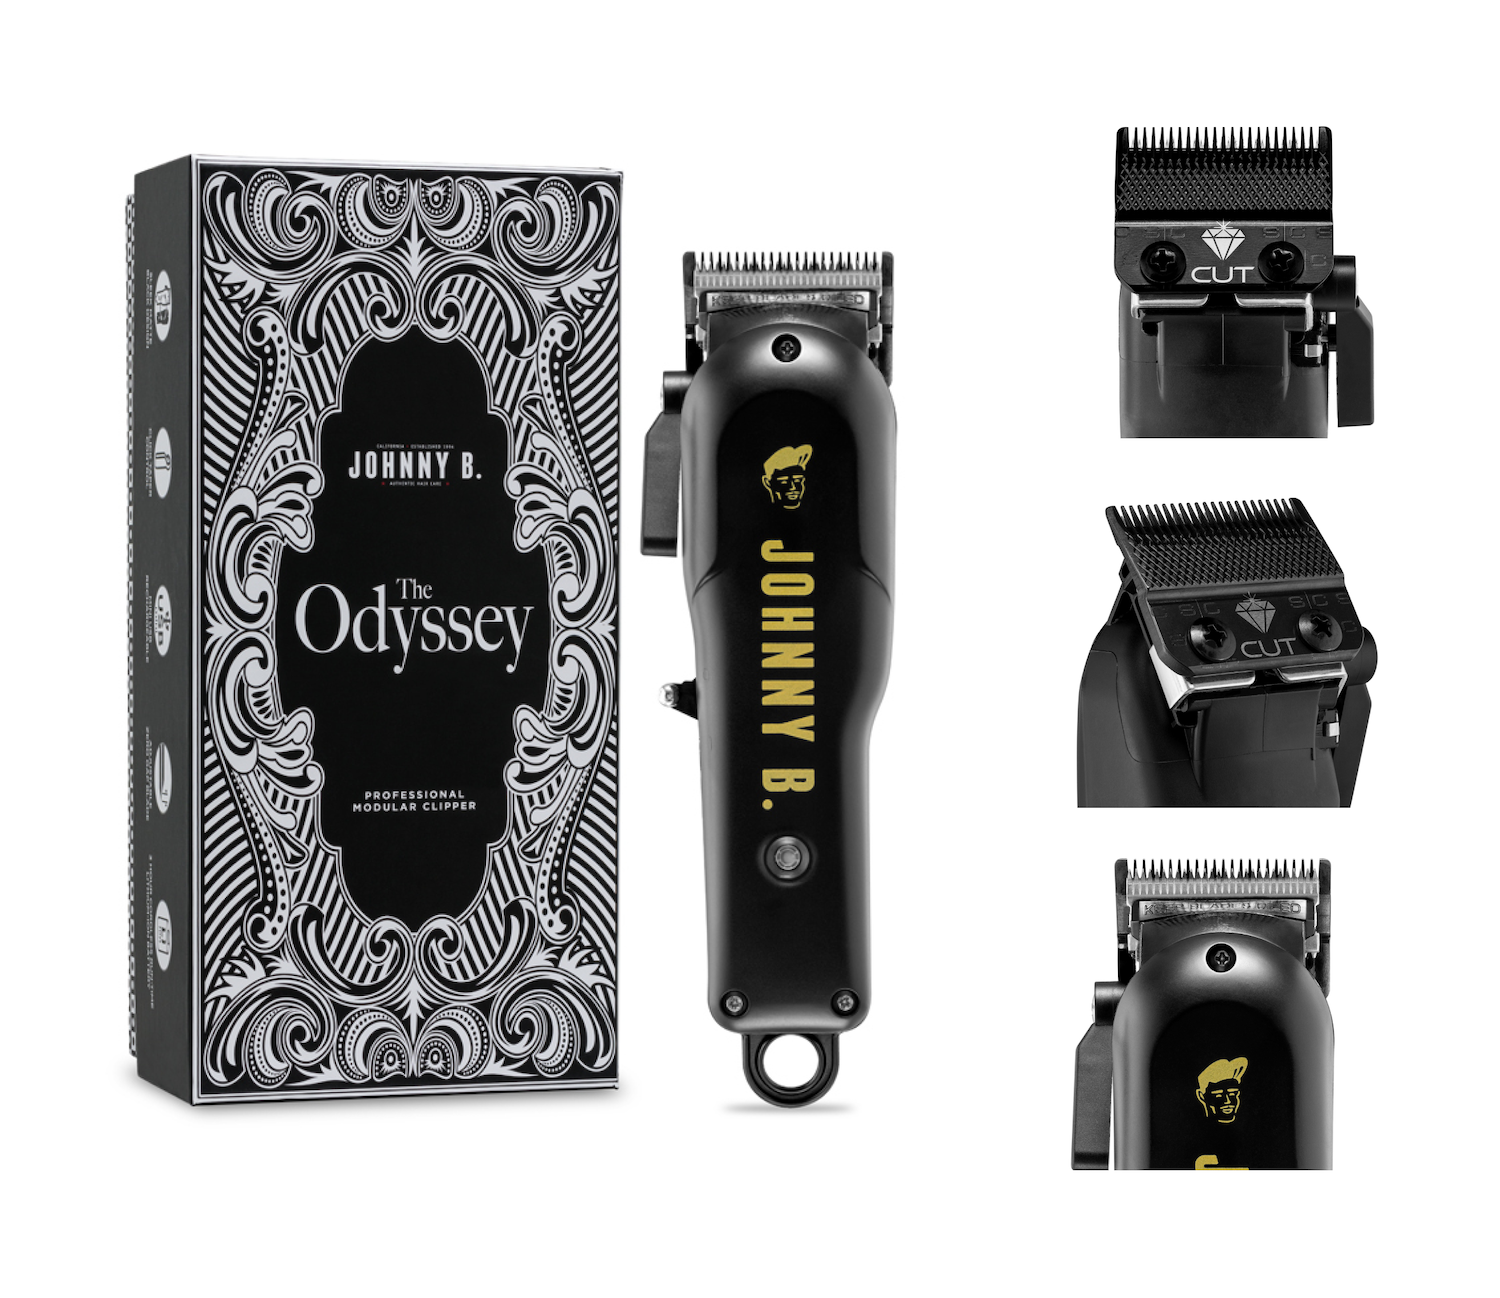 Odyssey Professional Clipper with box packaging